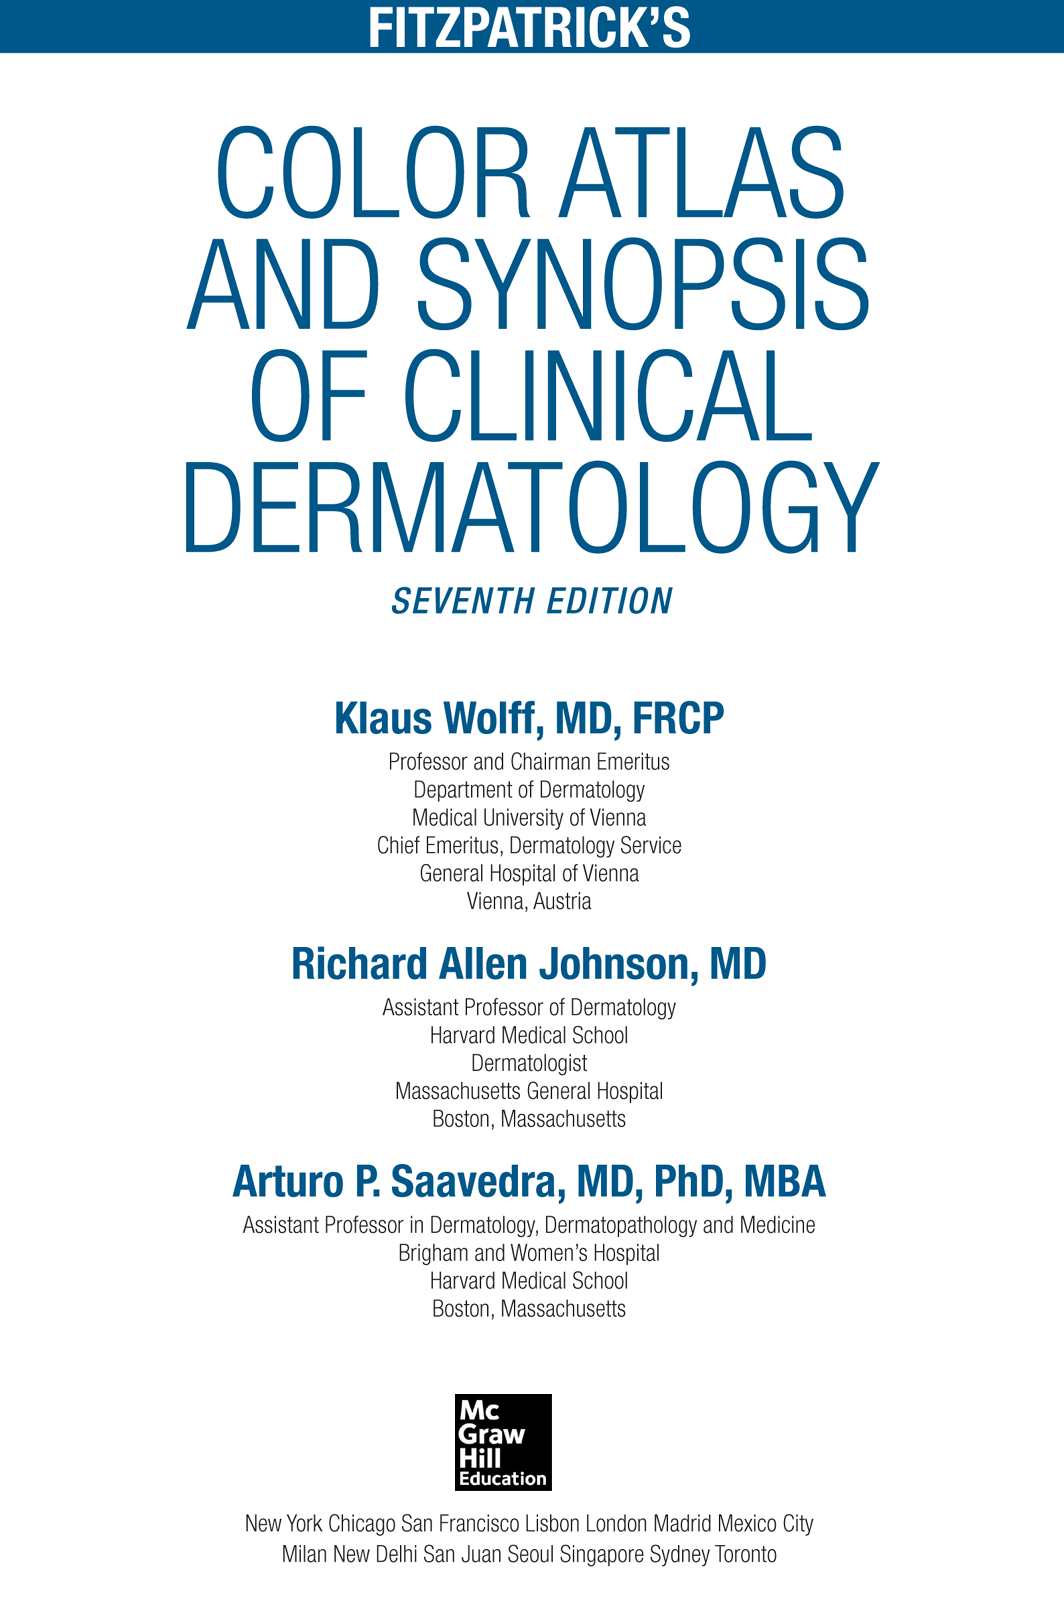 Fitzpatricks Color Atlas and Synopsis of Clinical Dermatology - image 1